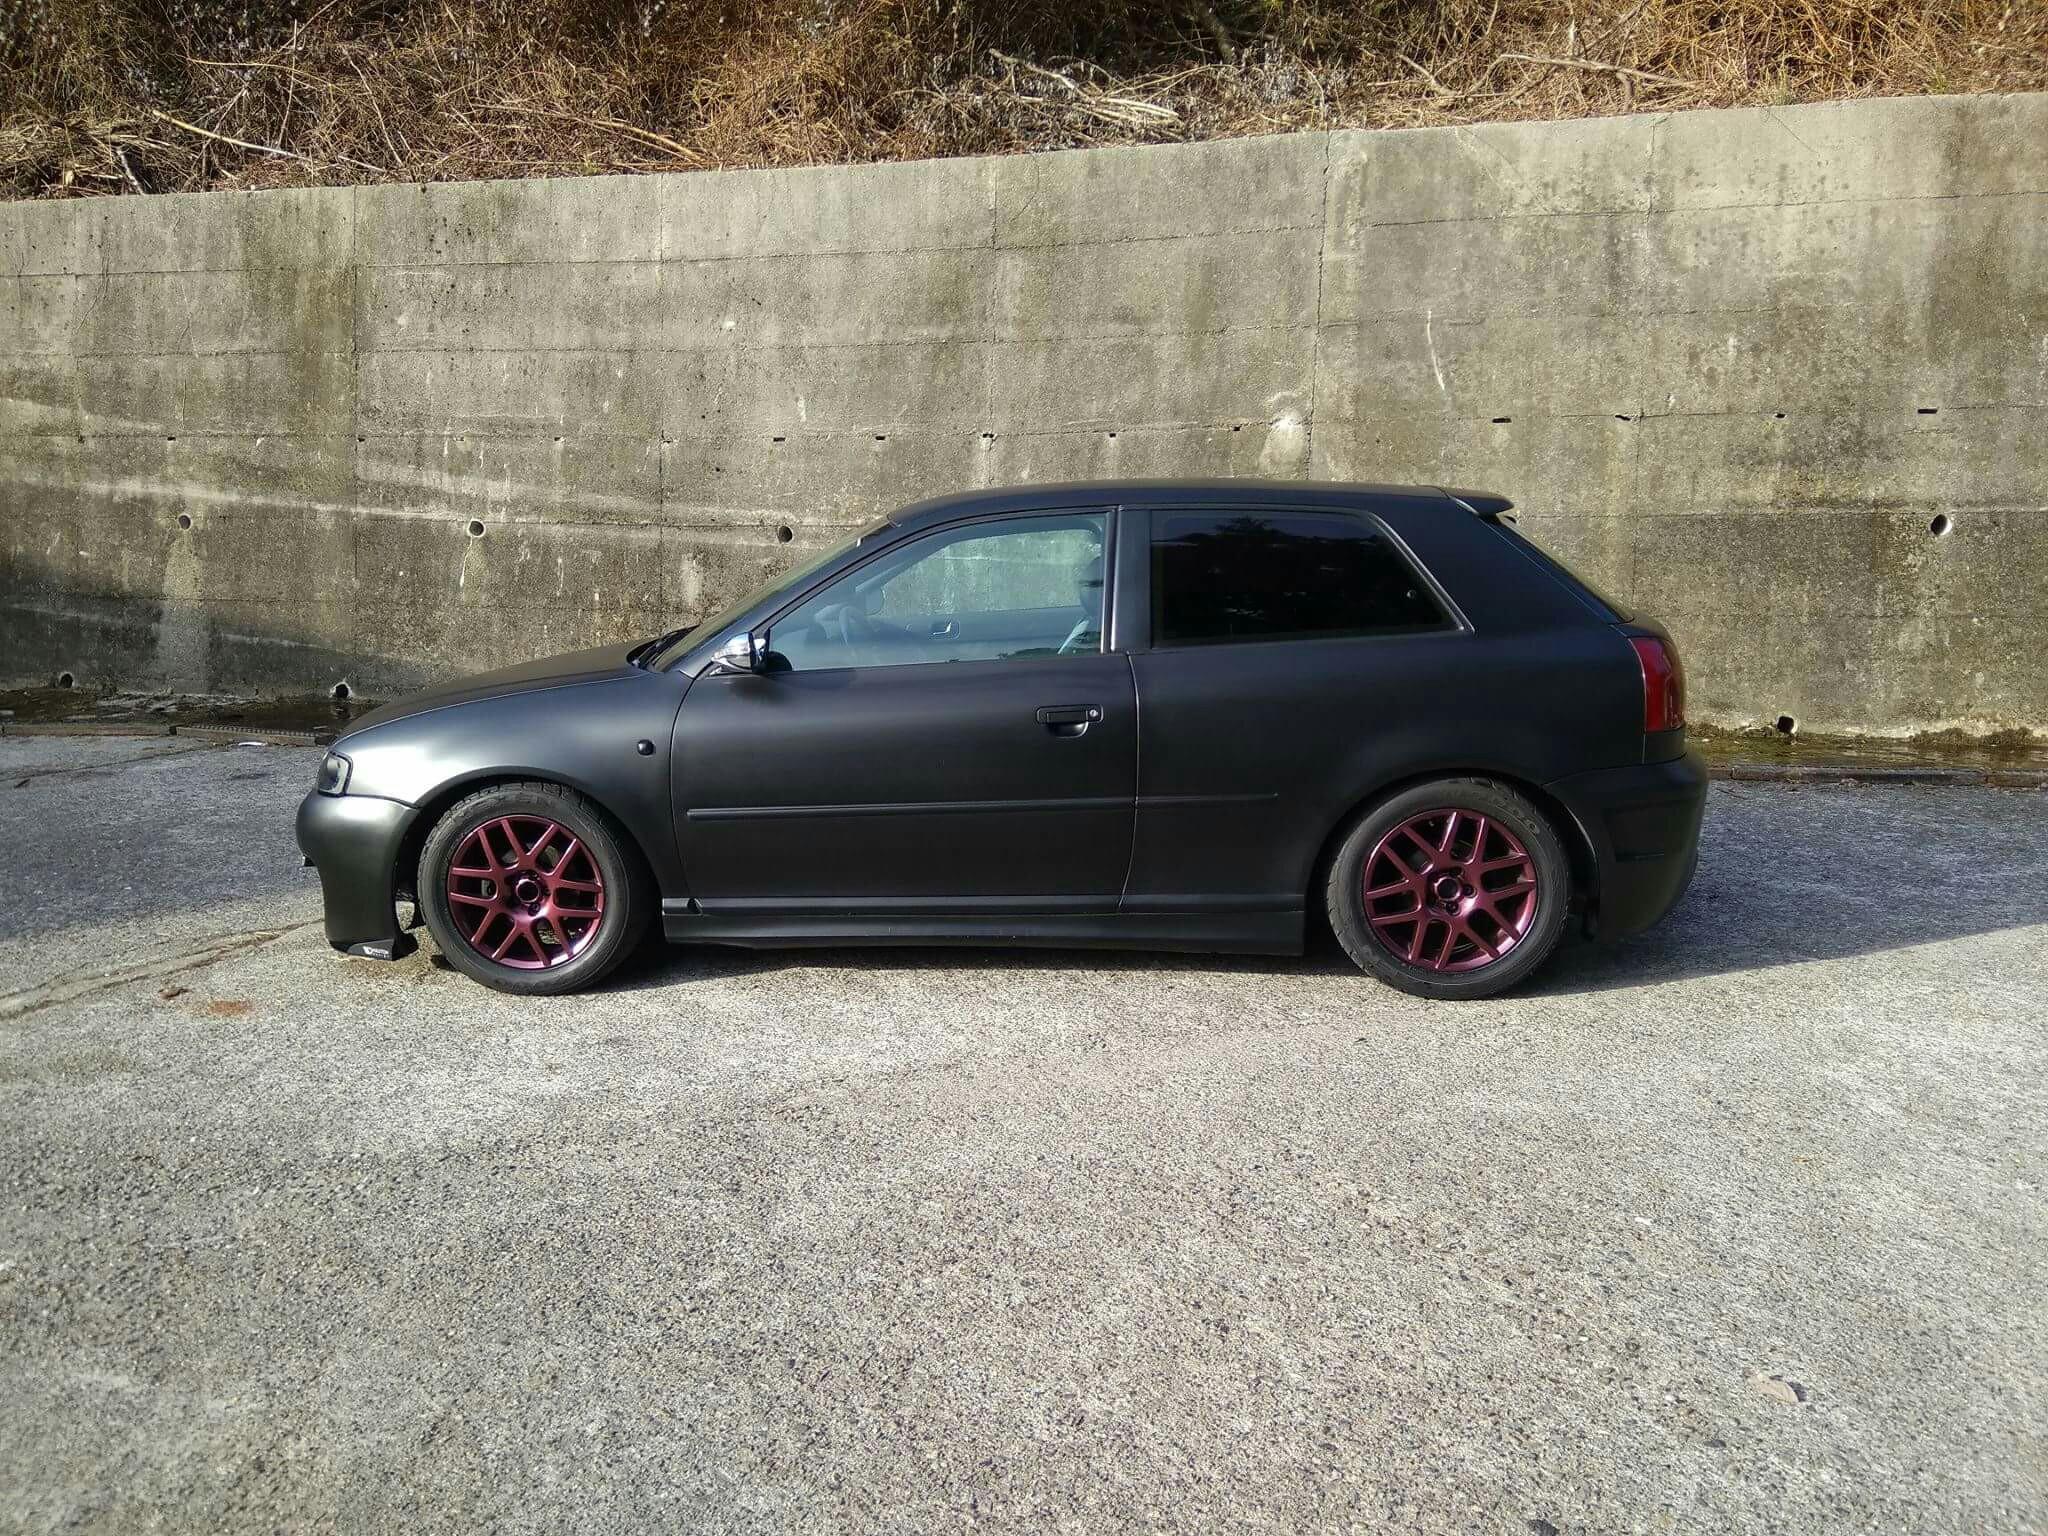 Audi A3 Tuning Nero Opaco In 2 Susello For 2 500 00 For Sale Shpock